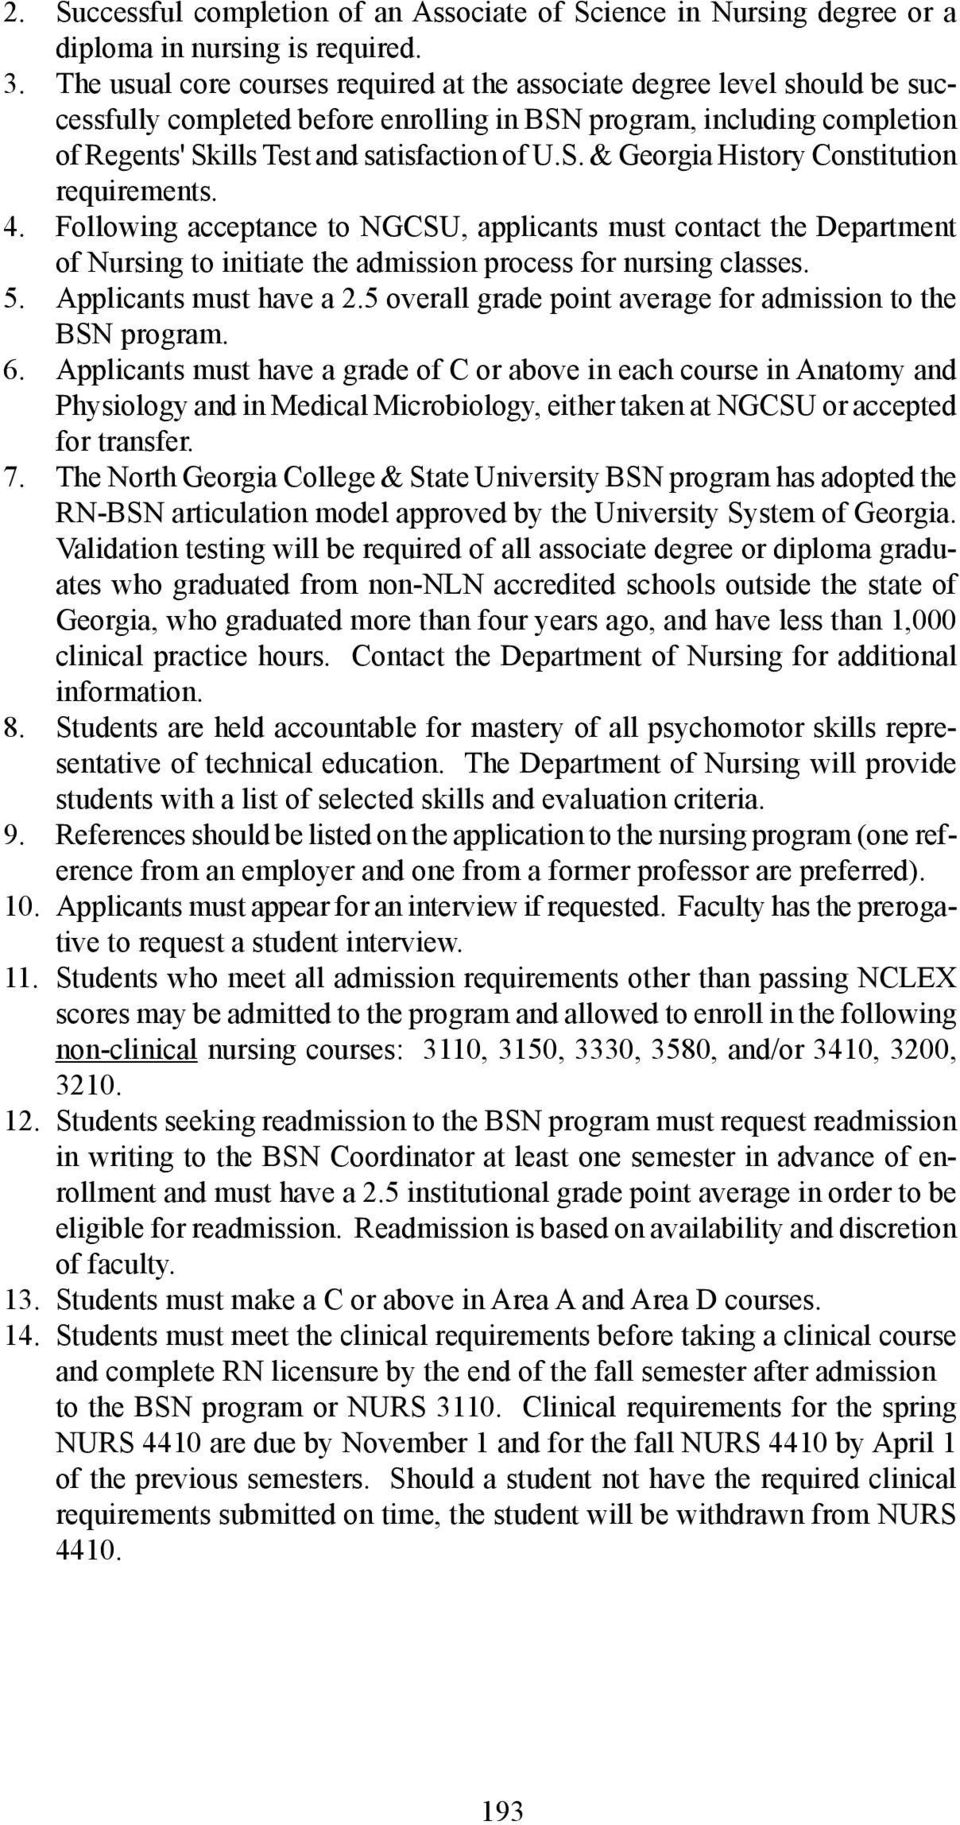 4. Following acceptance to NGCSU, applicants must contact the Department of Nursing to initiate the admission process for nursing classes. 5. Applicants must have a 2.